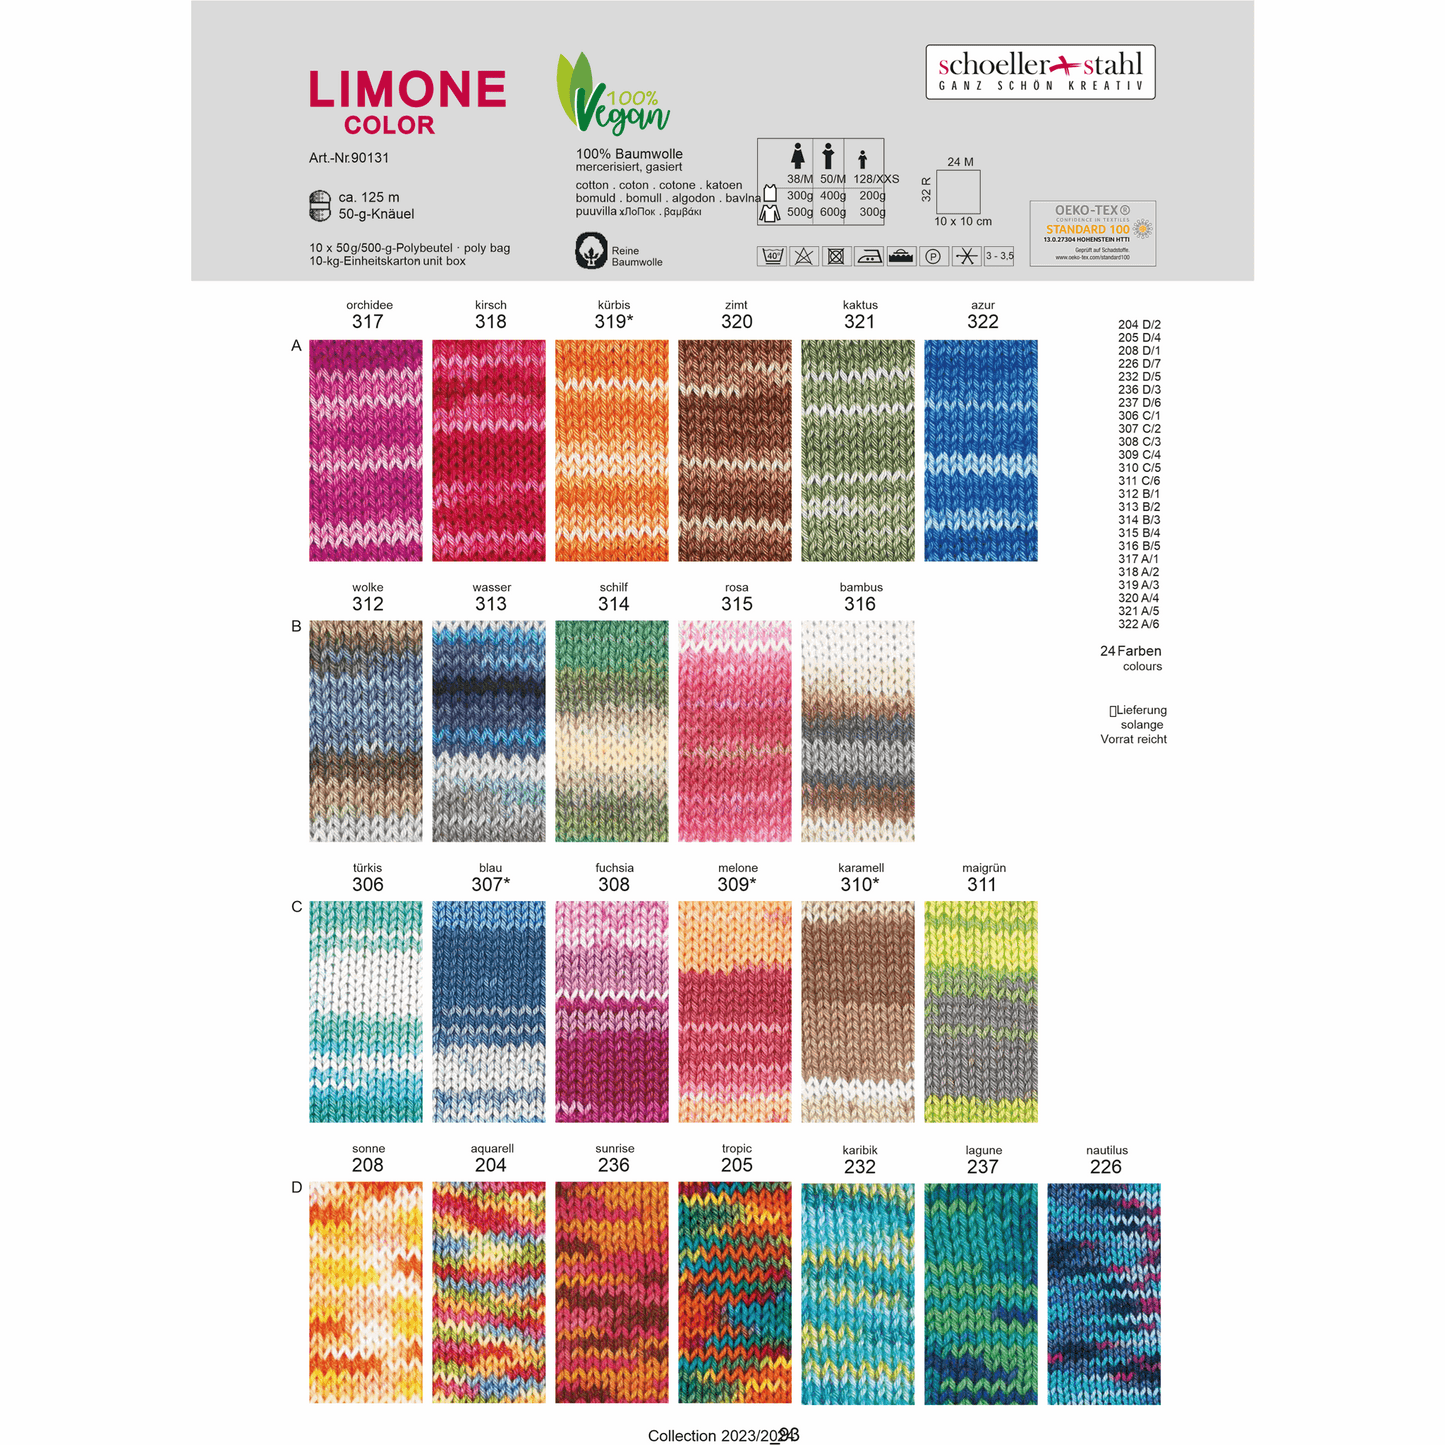 Limone color 50g, 90131, Farbe 306, türkis